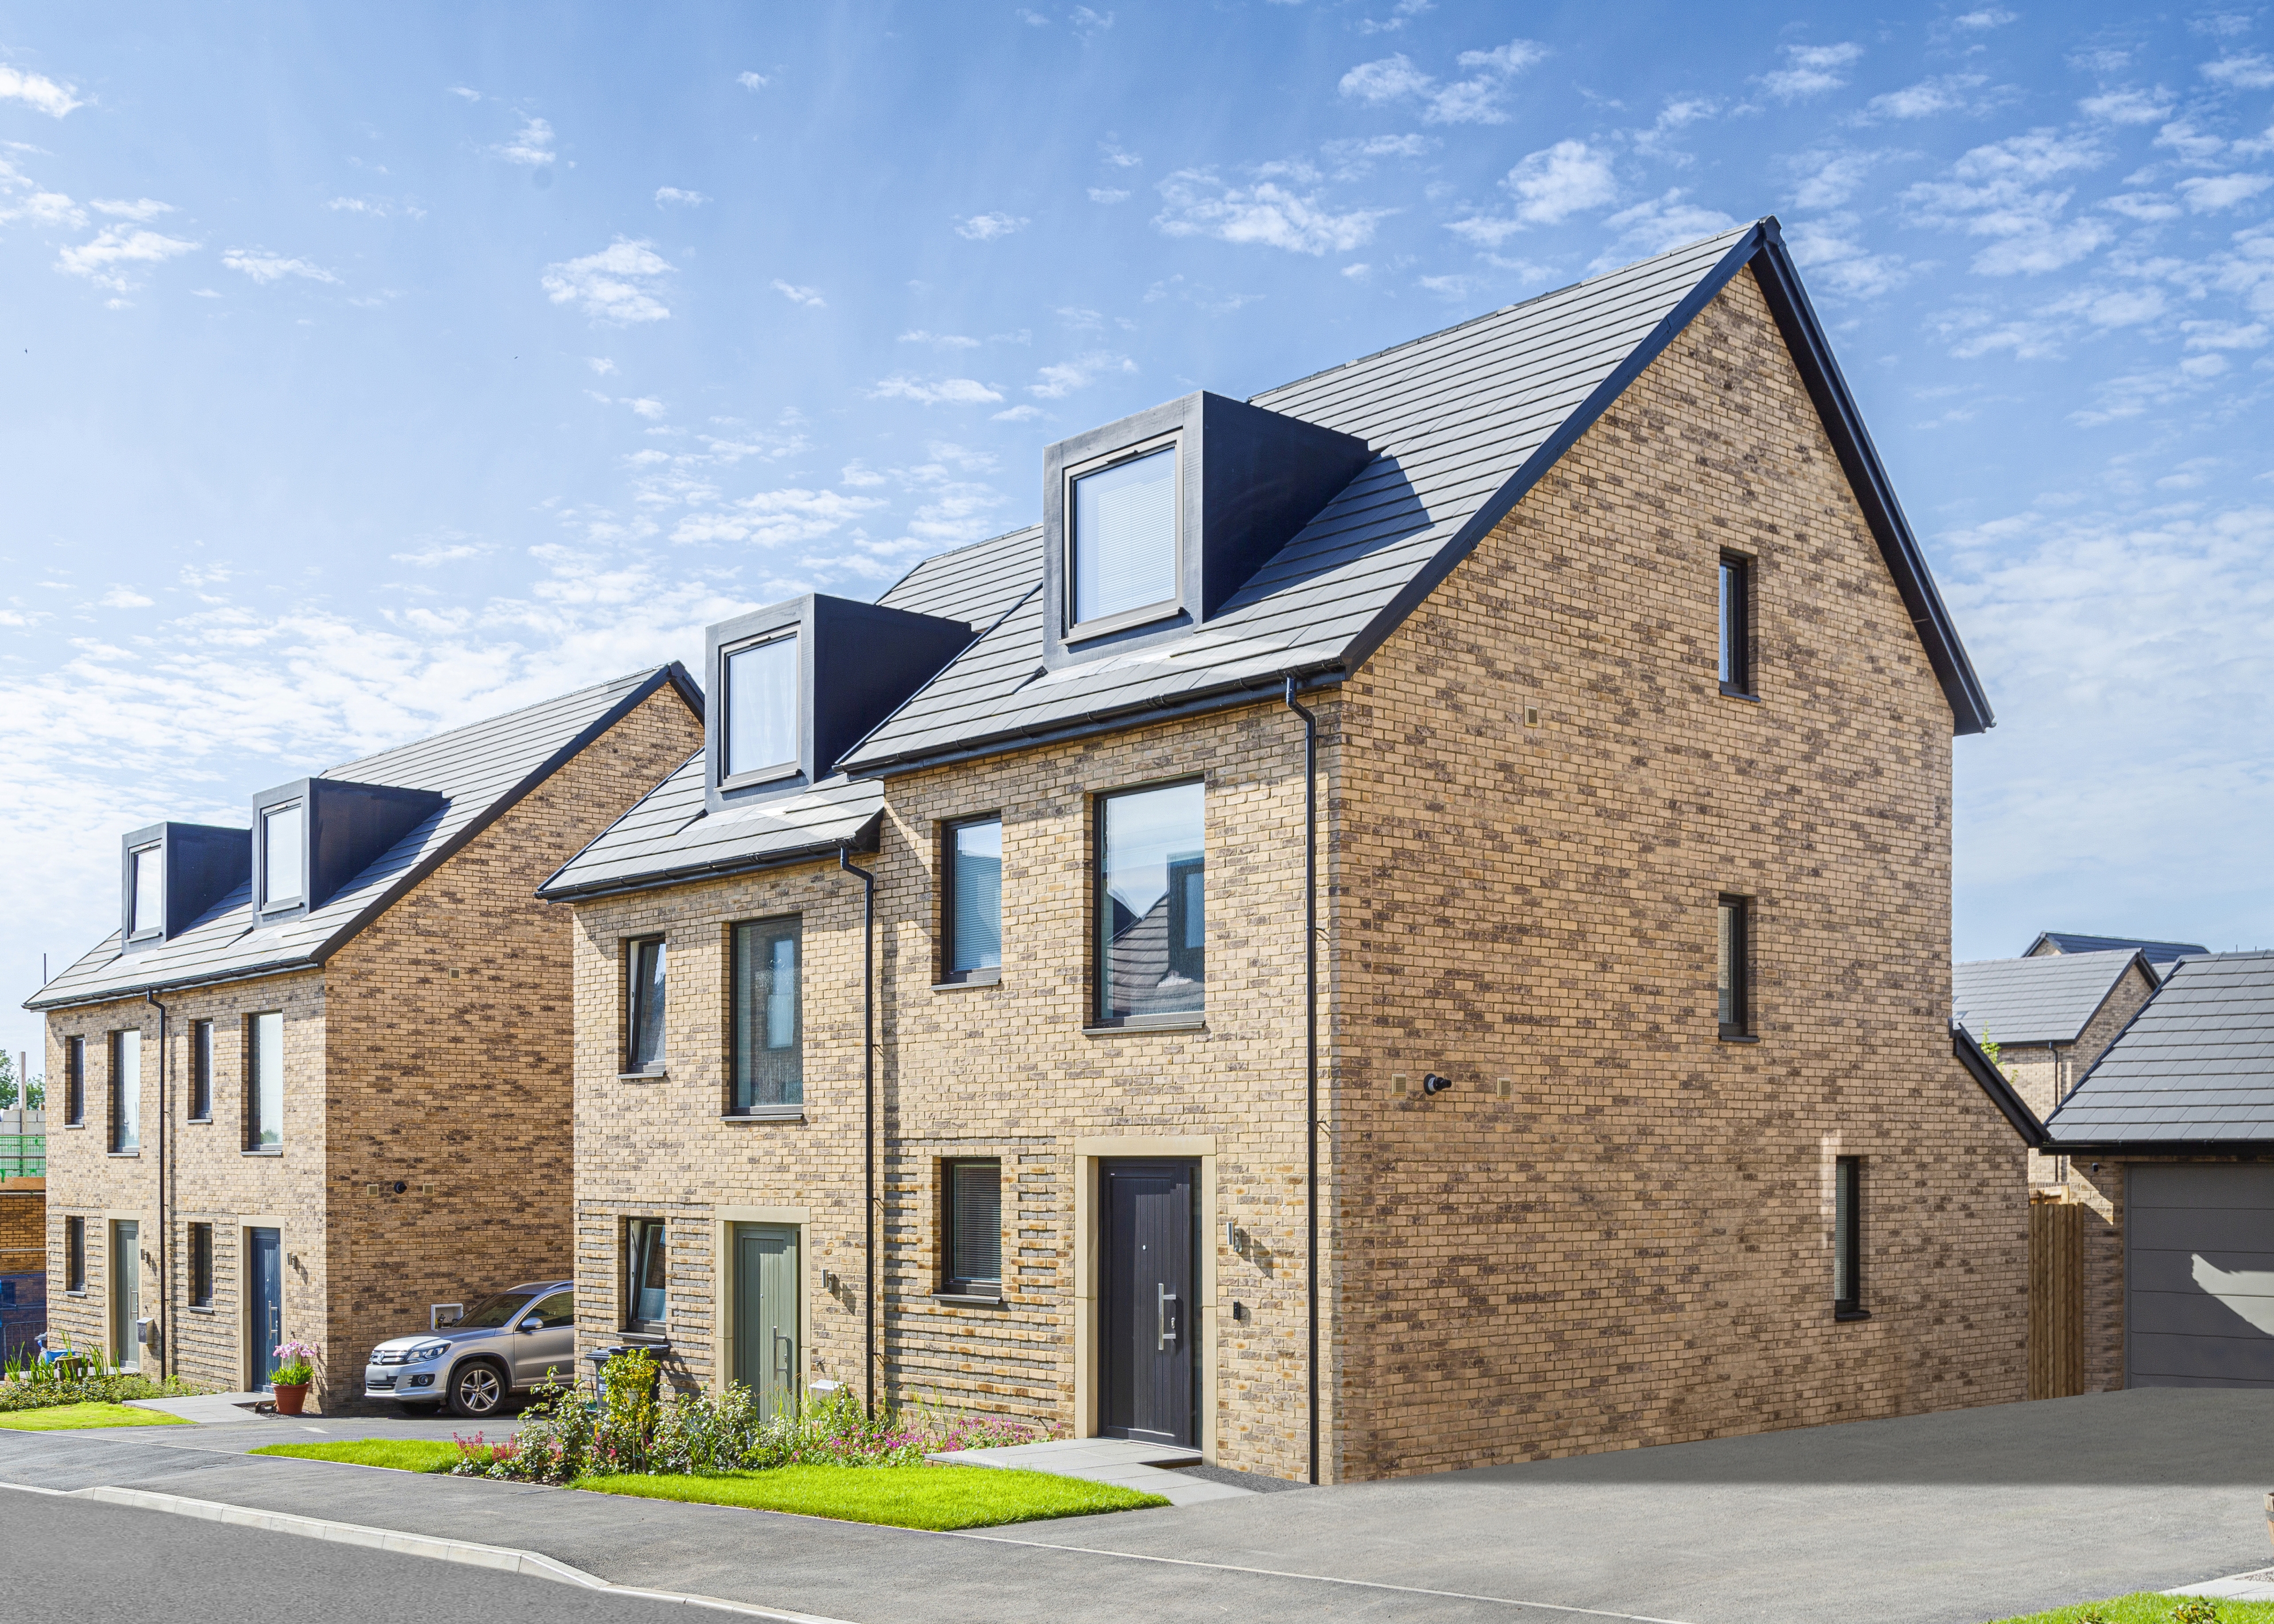 4 New build homes, The Old Printworks, Frome, Acorn Property Invest